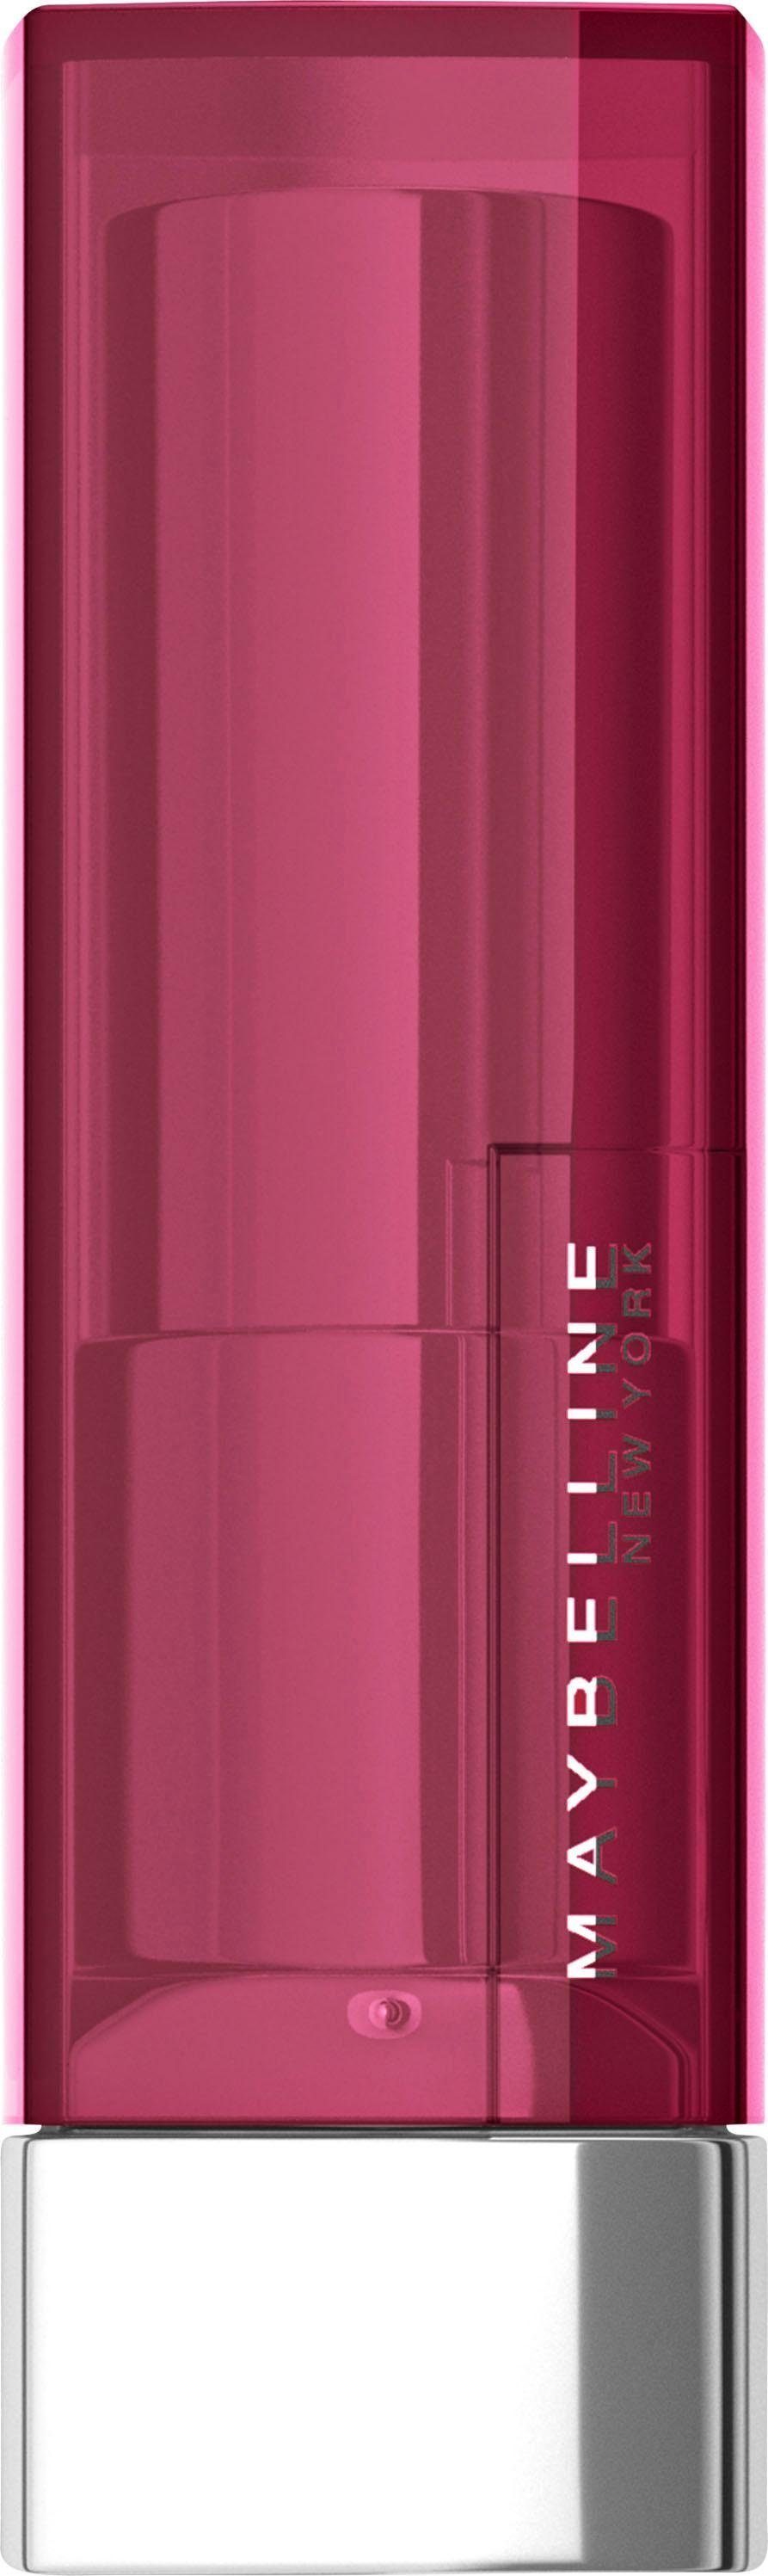 NEW stripped rose Sensational Roses Smoked Lippenstift YORK 300 MAYBELLINE Color